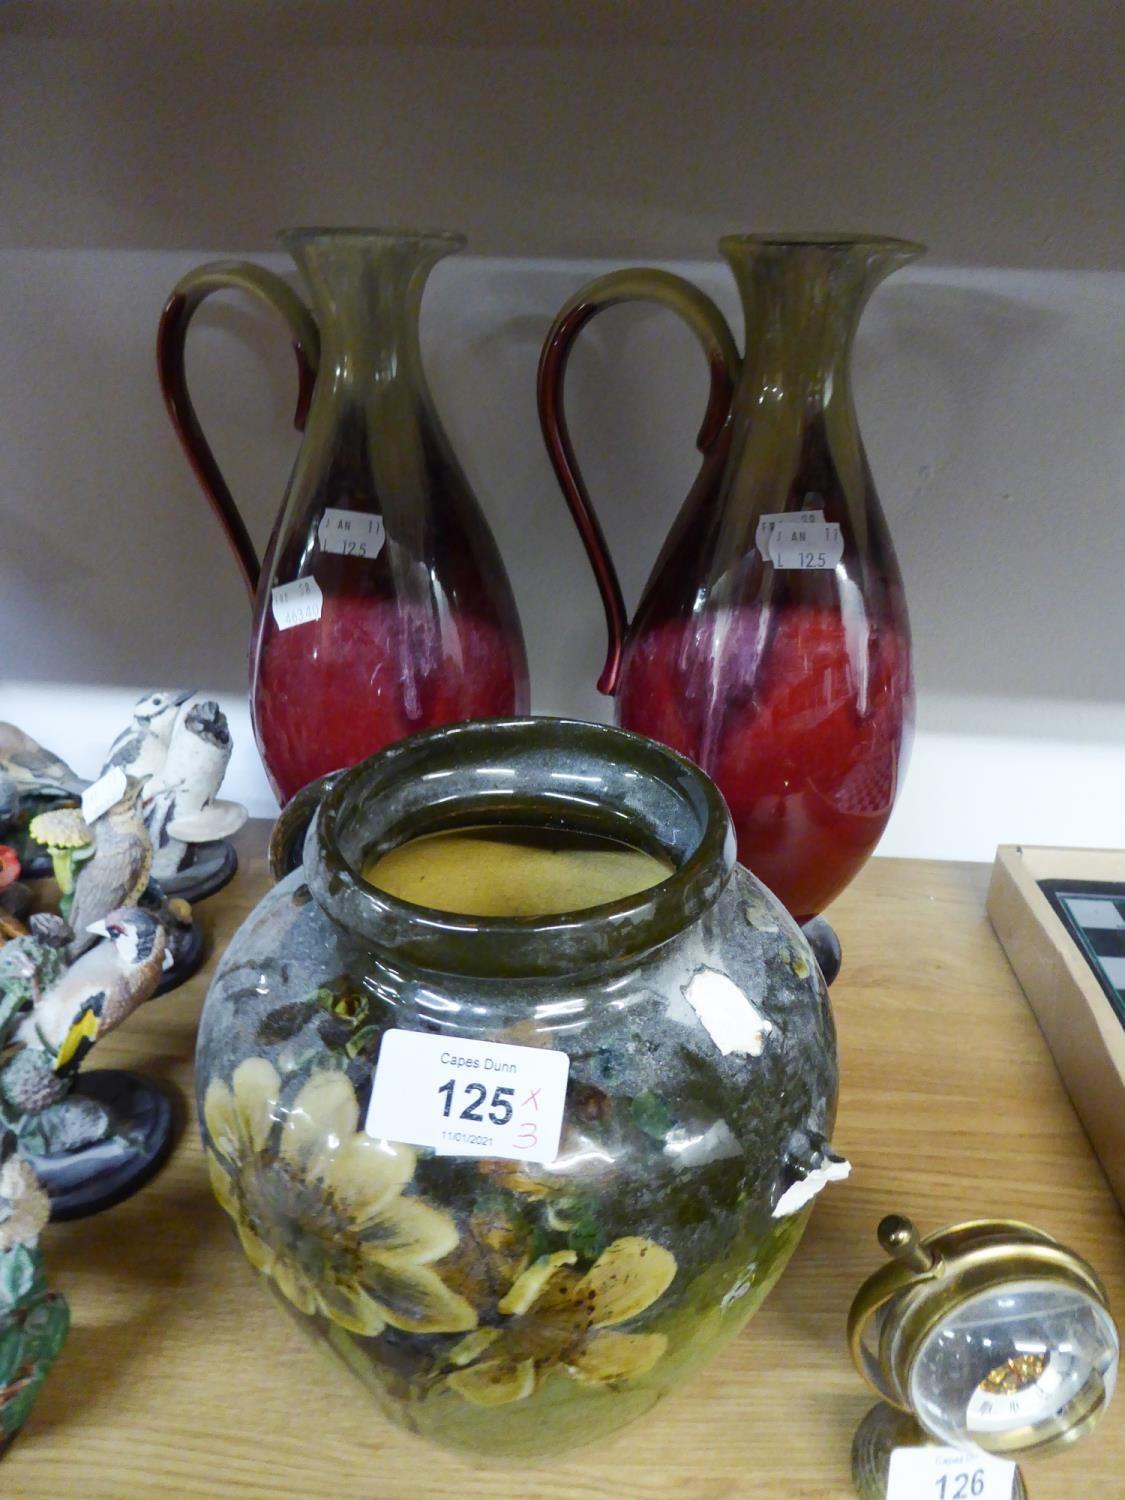 A PAIR OF GREEN AND MAROON GLAZED POTTERY TALL URNS AND A TWO HANDLED VASE (ONE HANDLE MISSING)